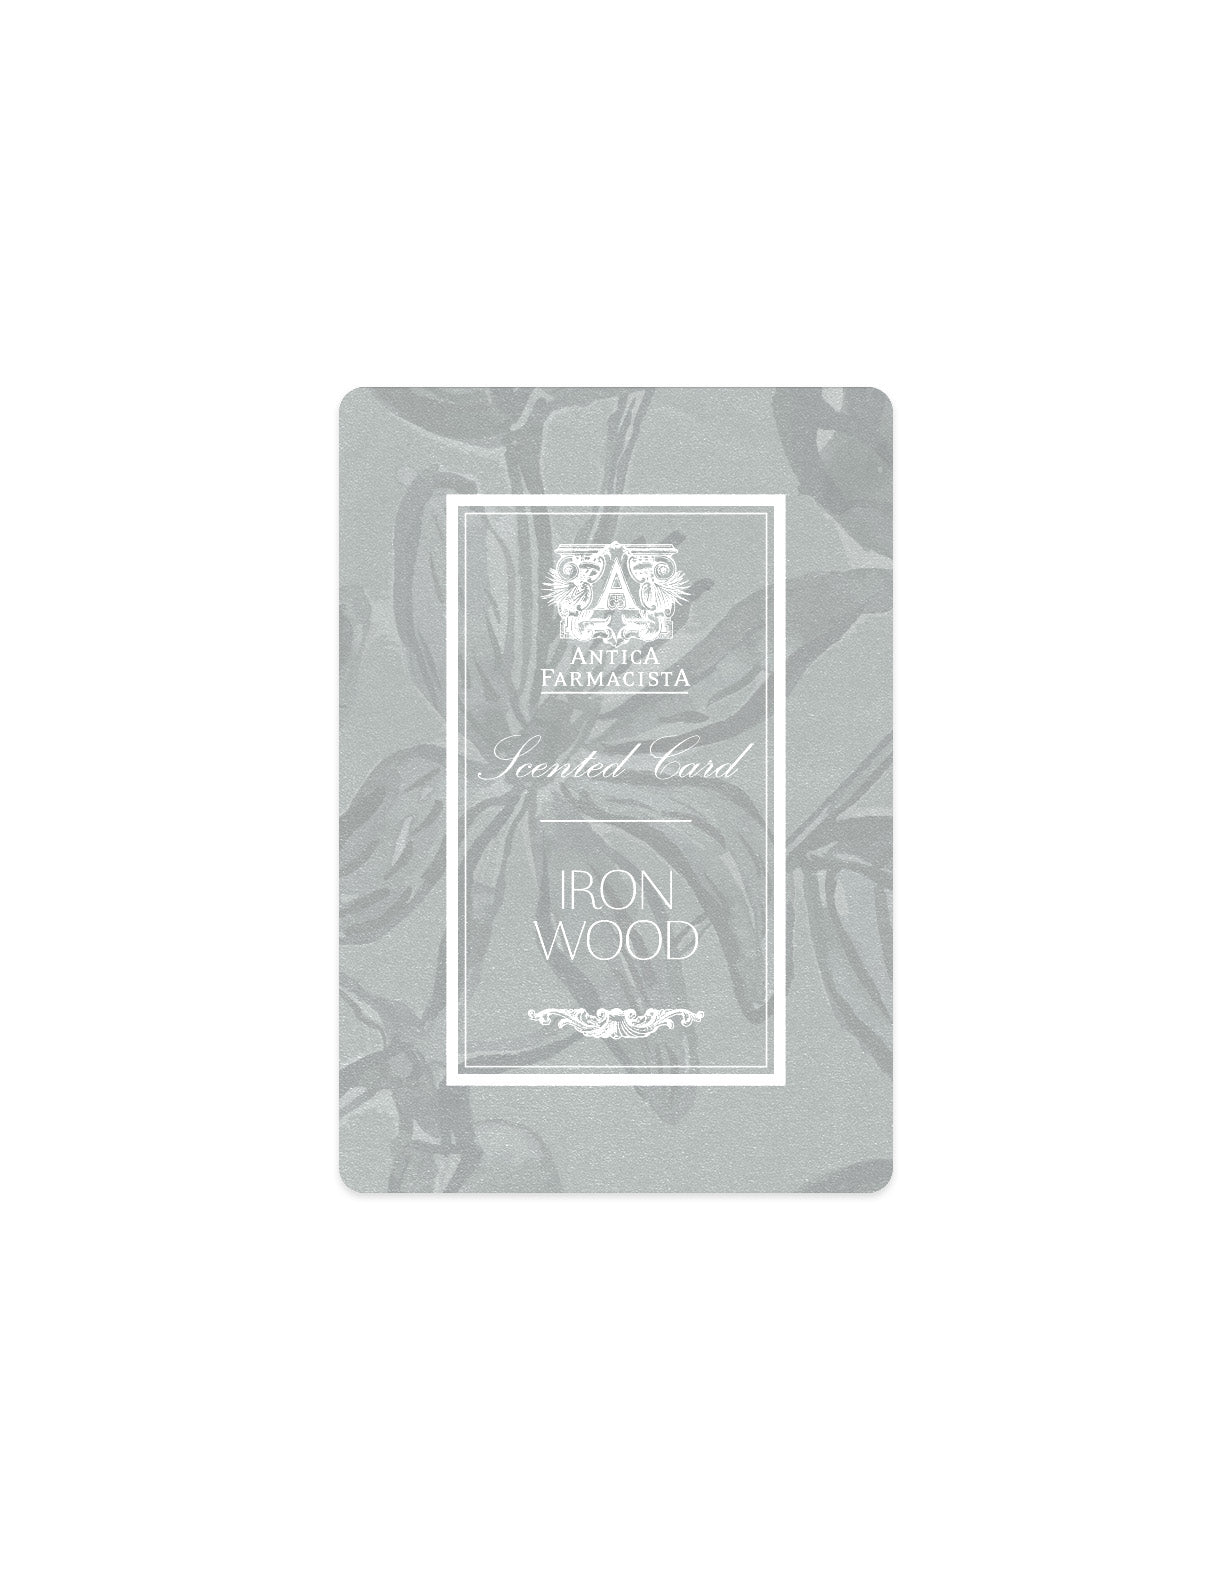 GWP - Scented Card - Ironwood